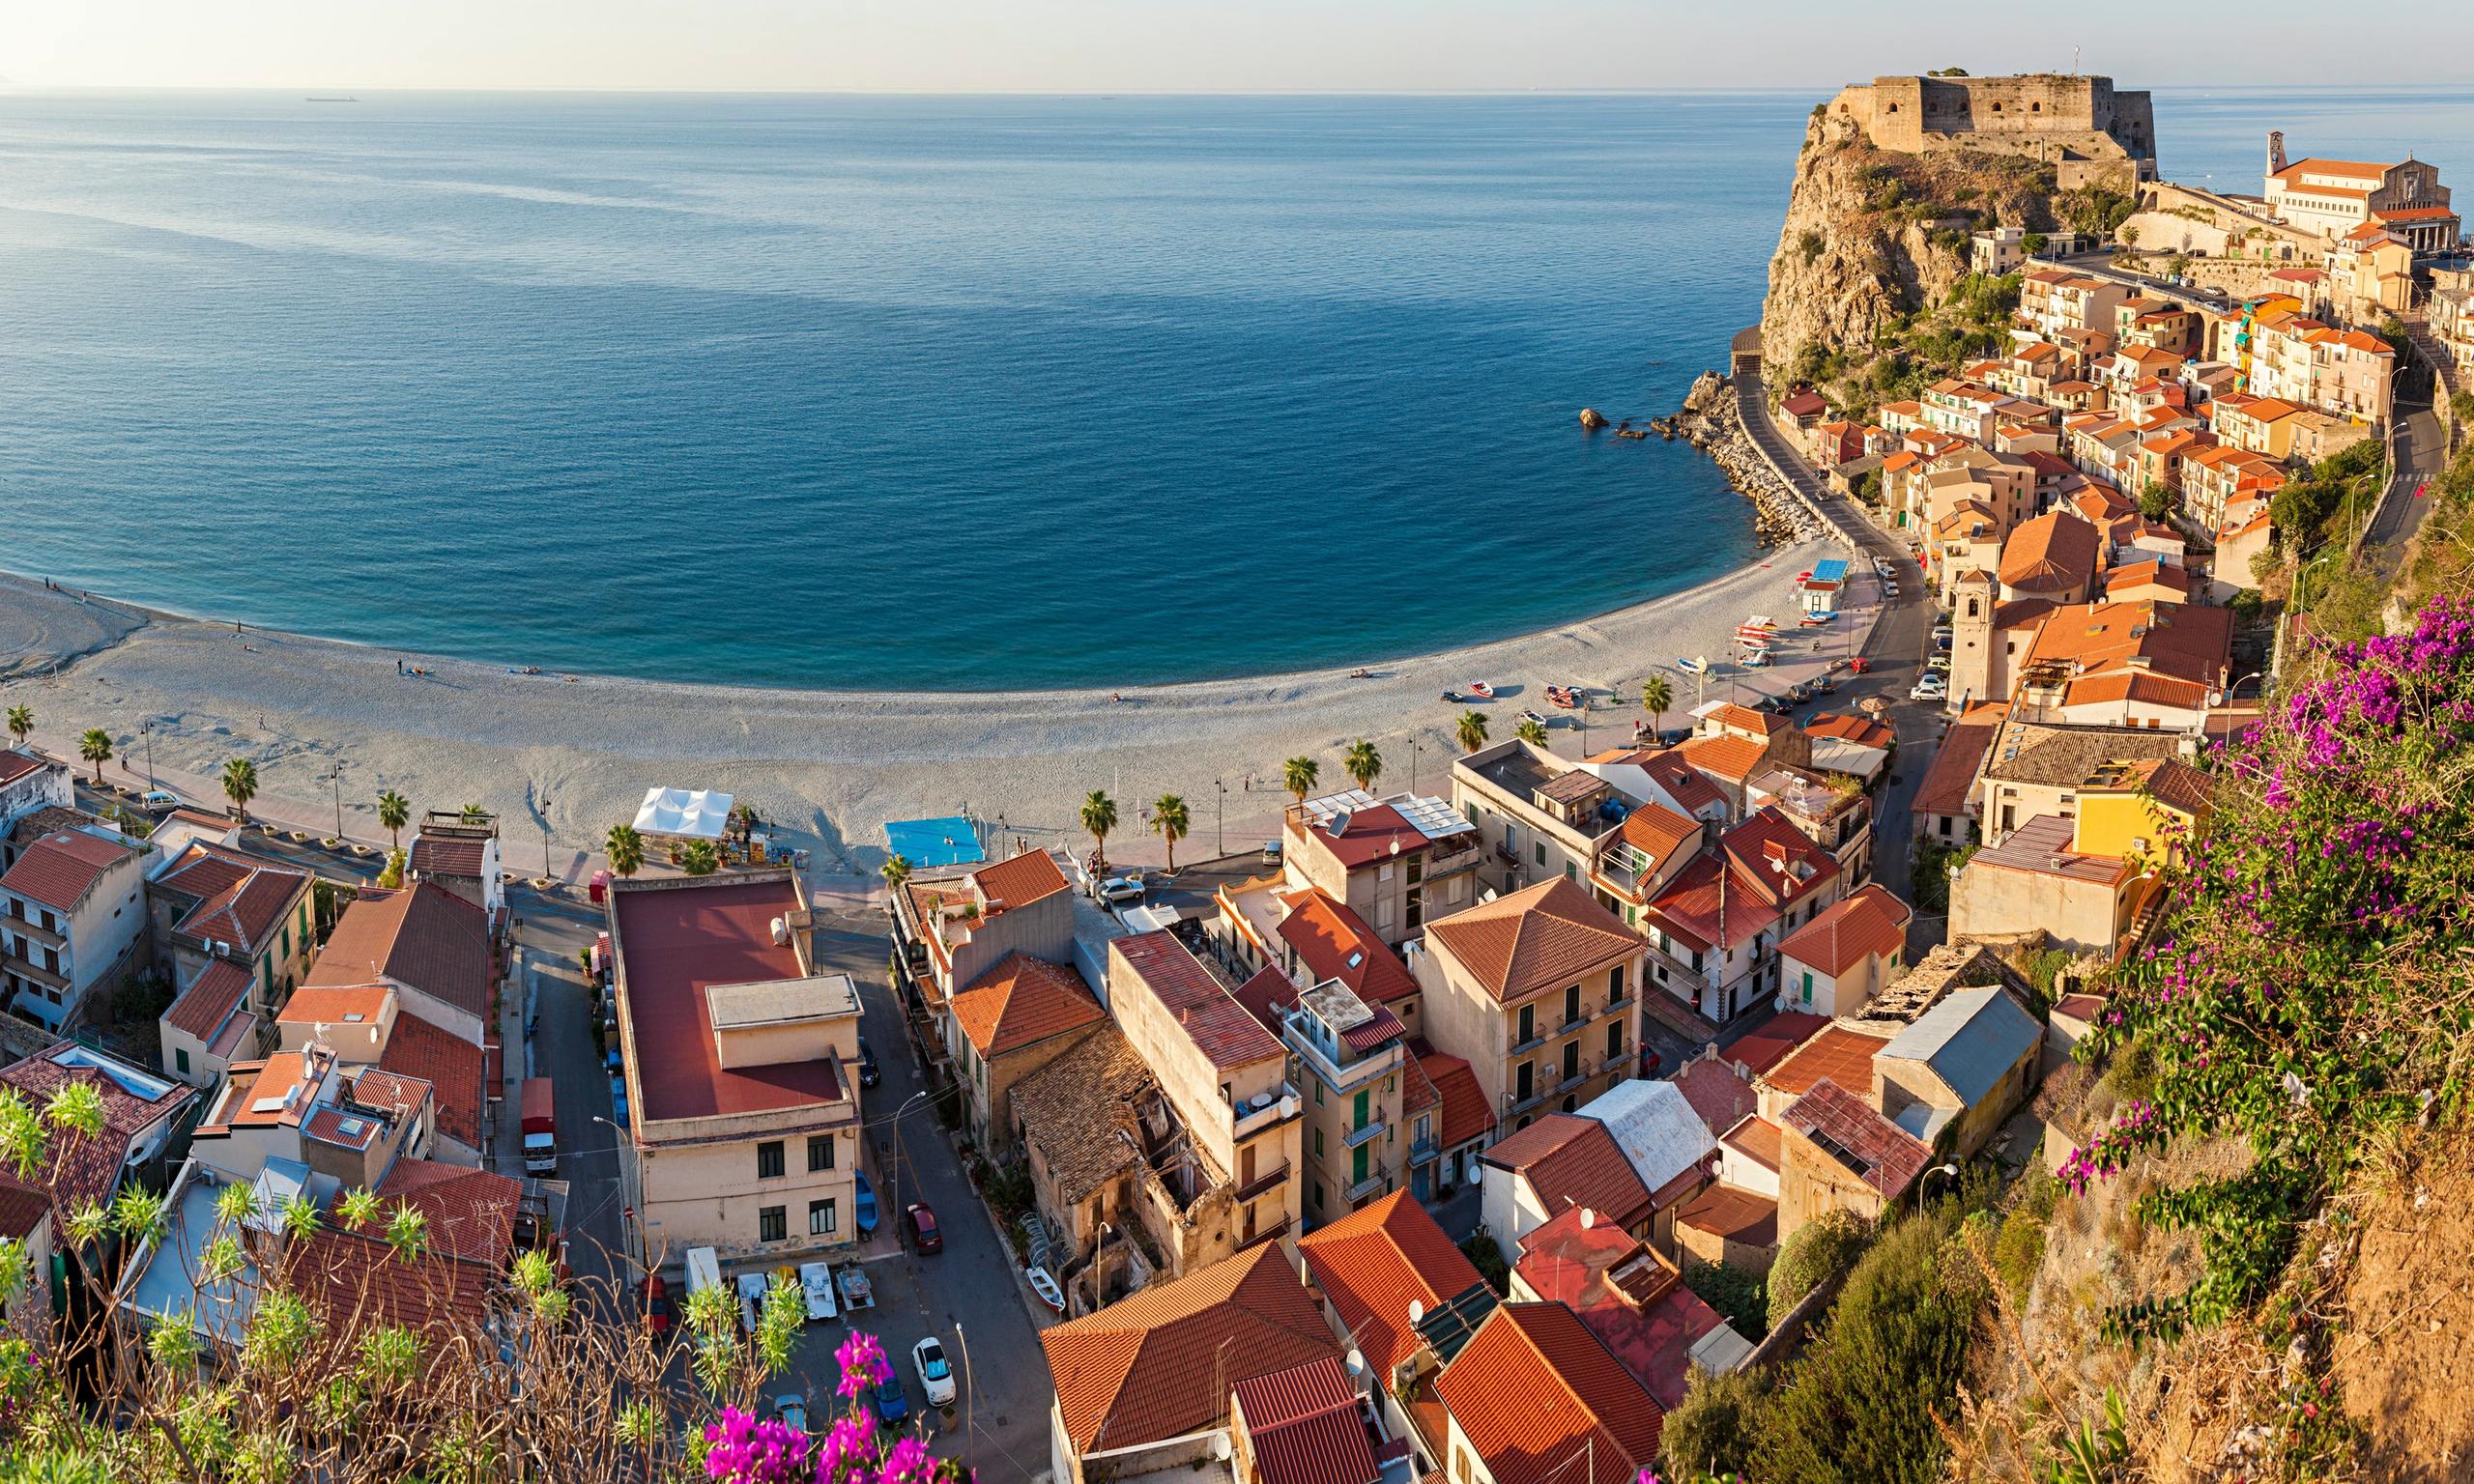 Holiday Guide To Calabria Italy The Best Beaches Bars Restaurants